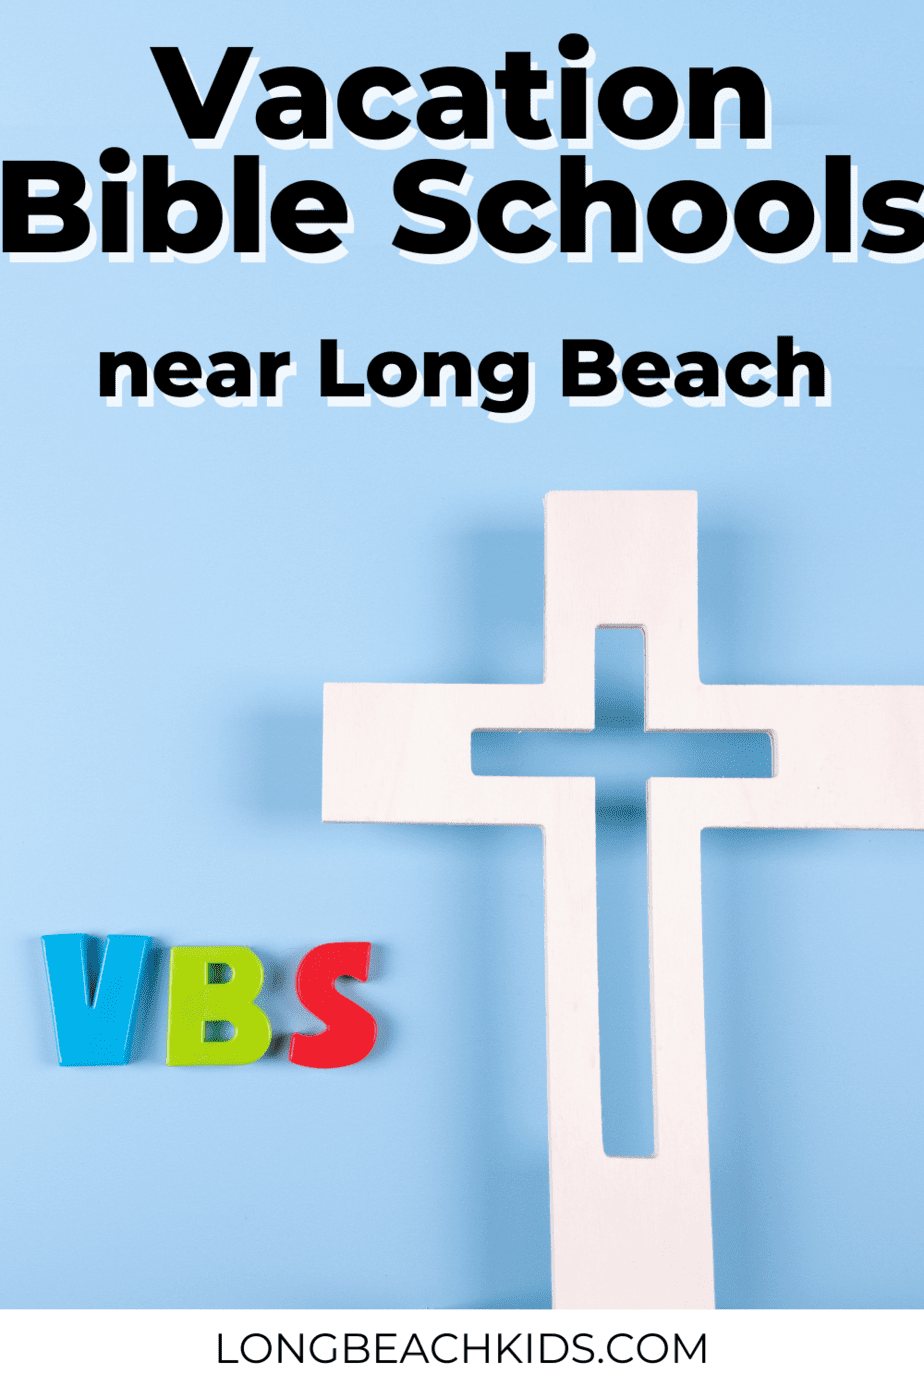 cross and letters spelling VBS; text: vacation bible schools near long beach